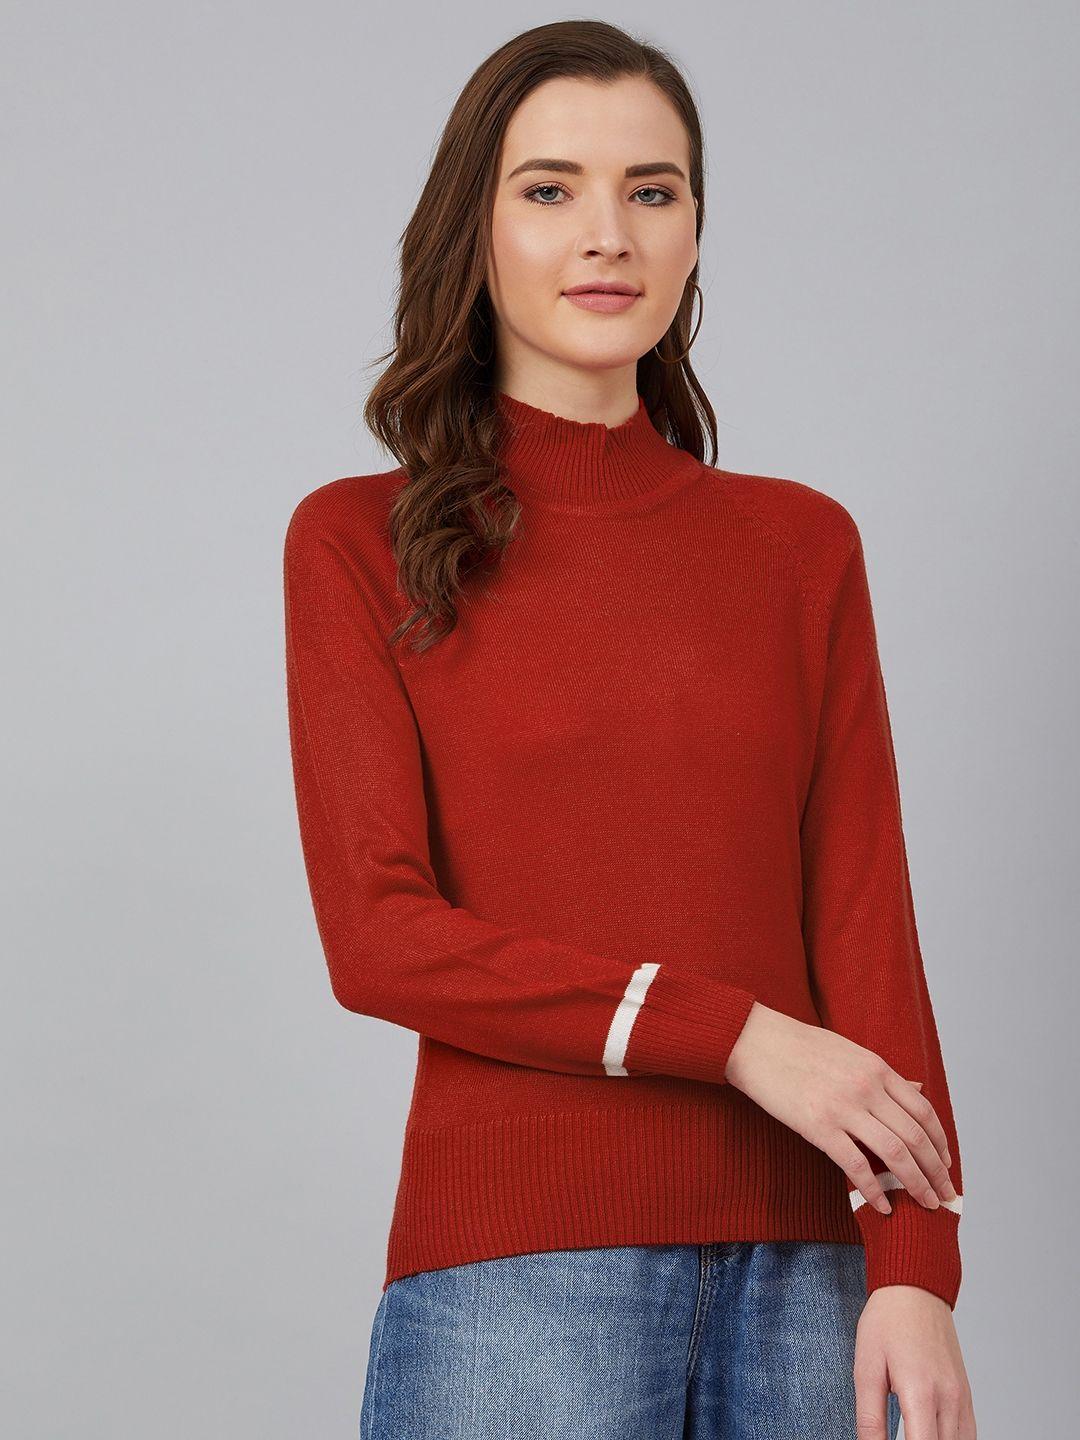 cayman-women-red-solid-pullover-acrylic-sweater